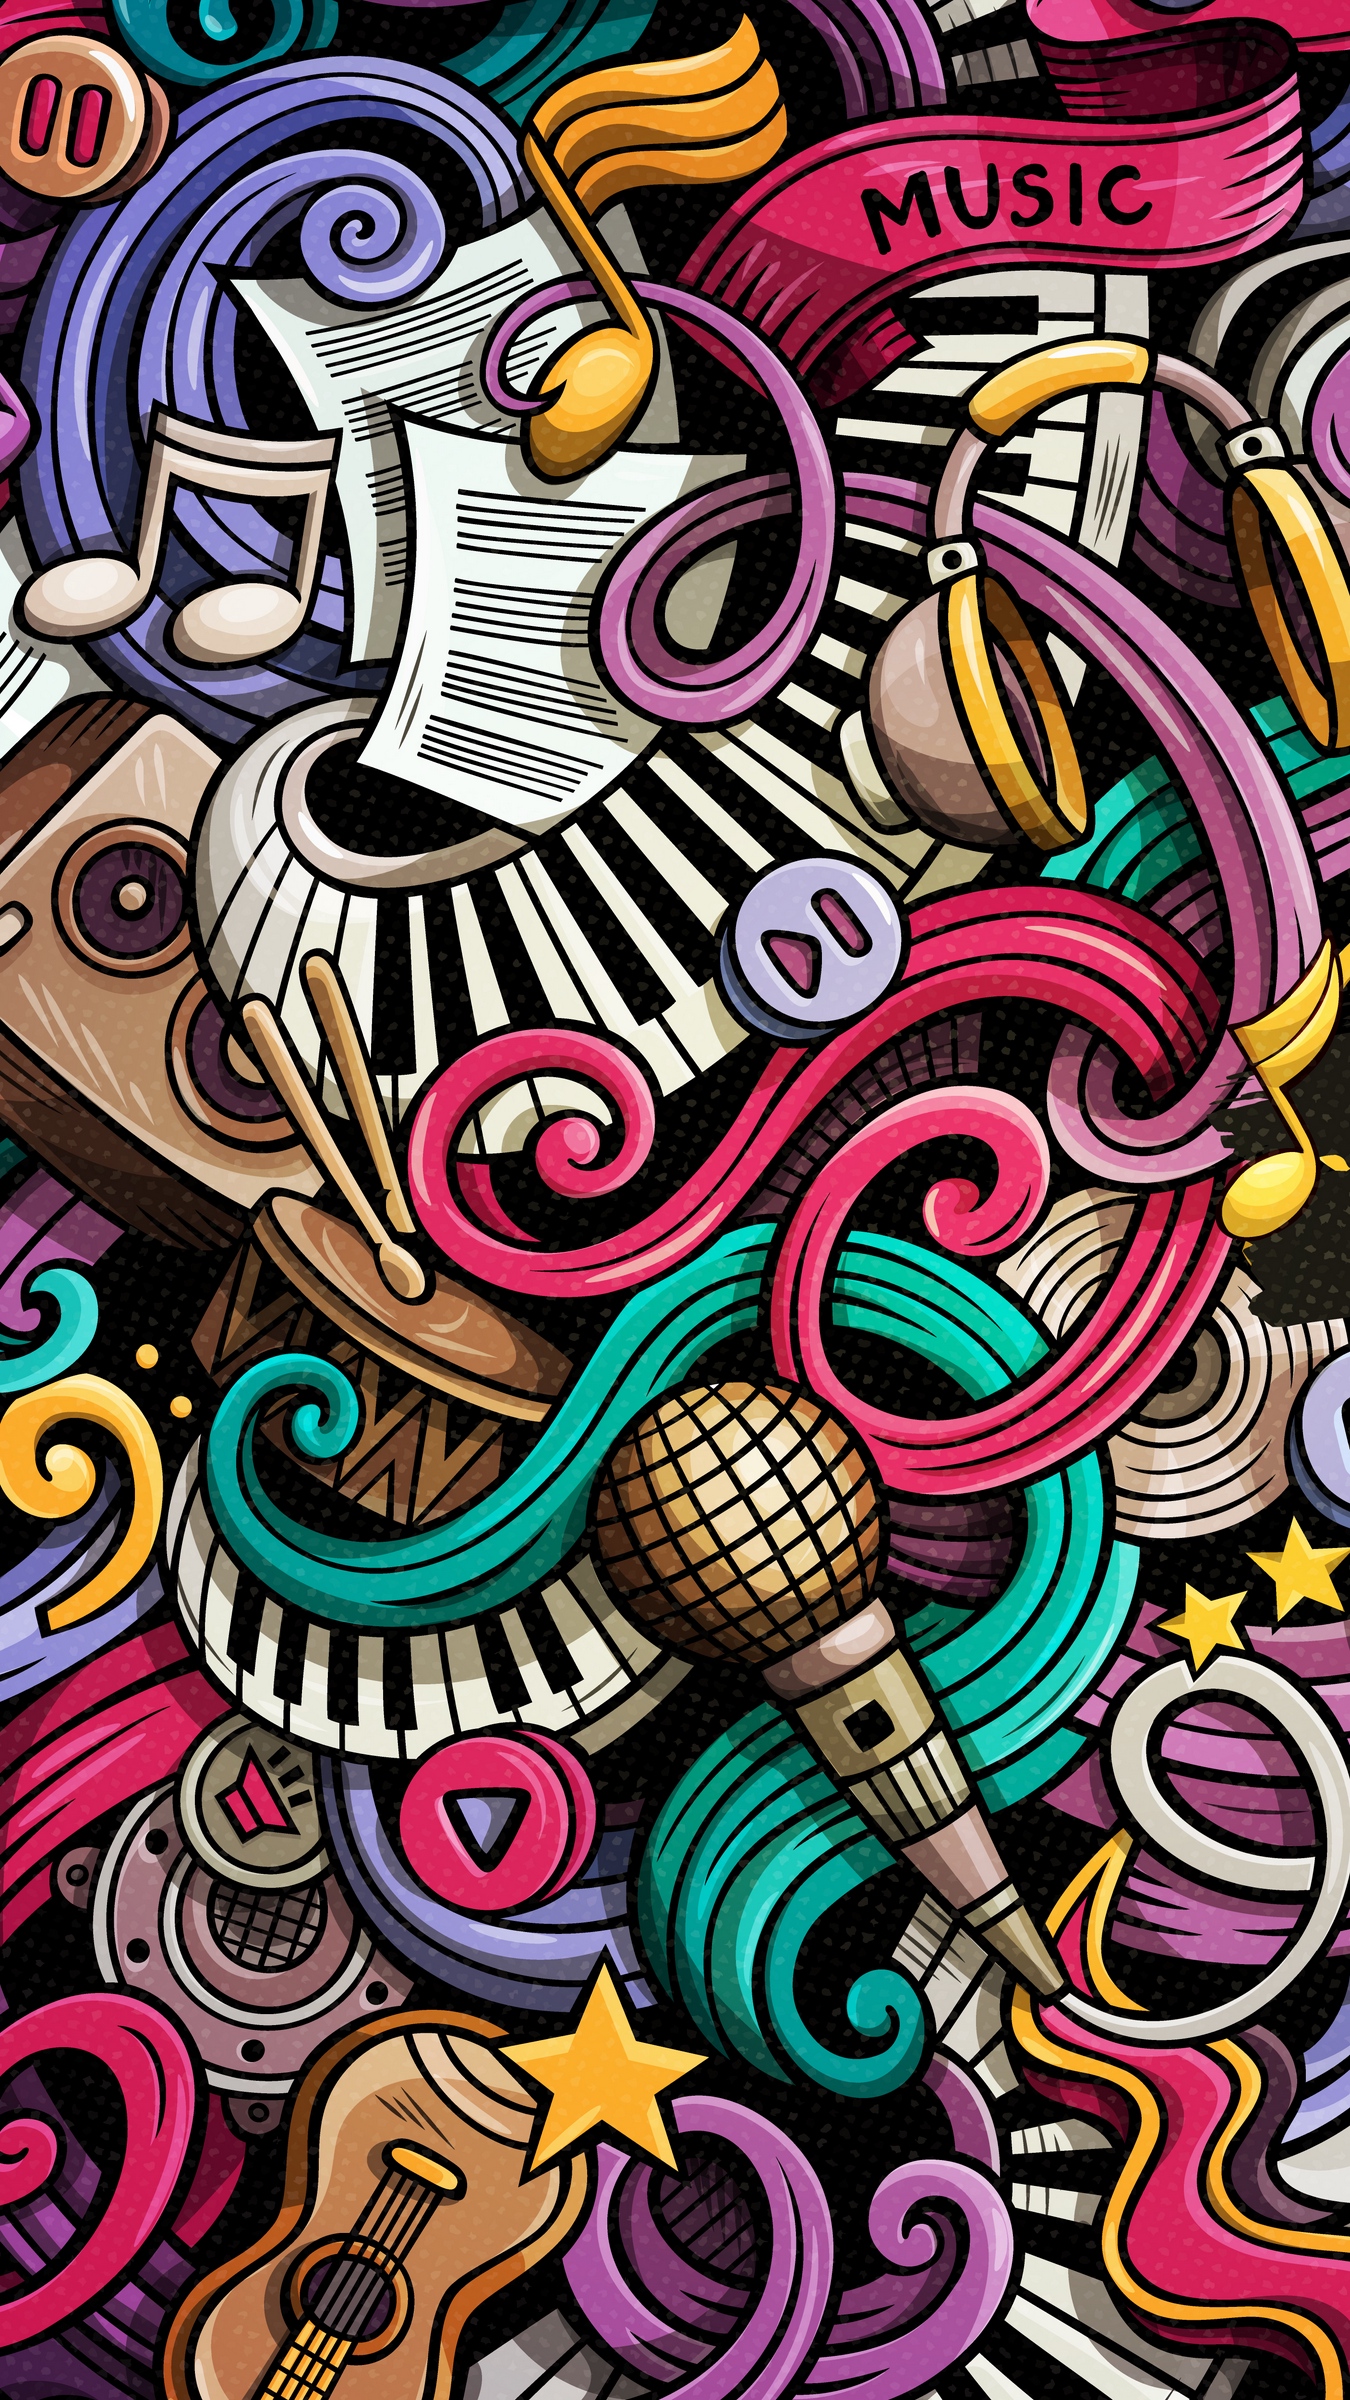 Wallpaper Music, Doodles, Colorful, Musical Instruments, - Iphone Doodle Wallpaper Hd - HD Wallpaper 